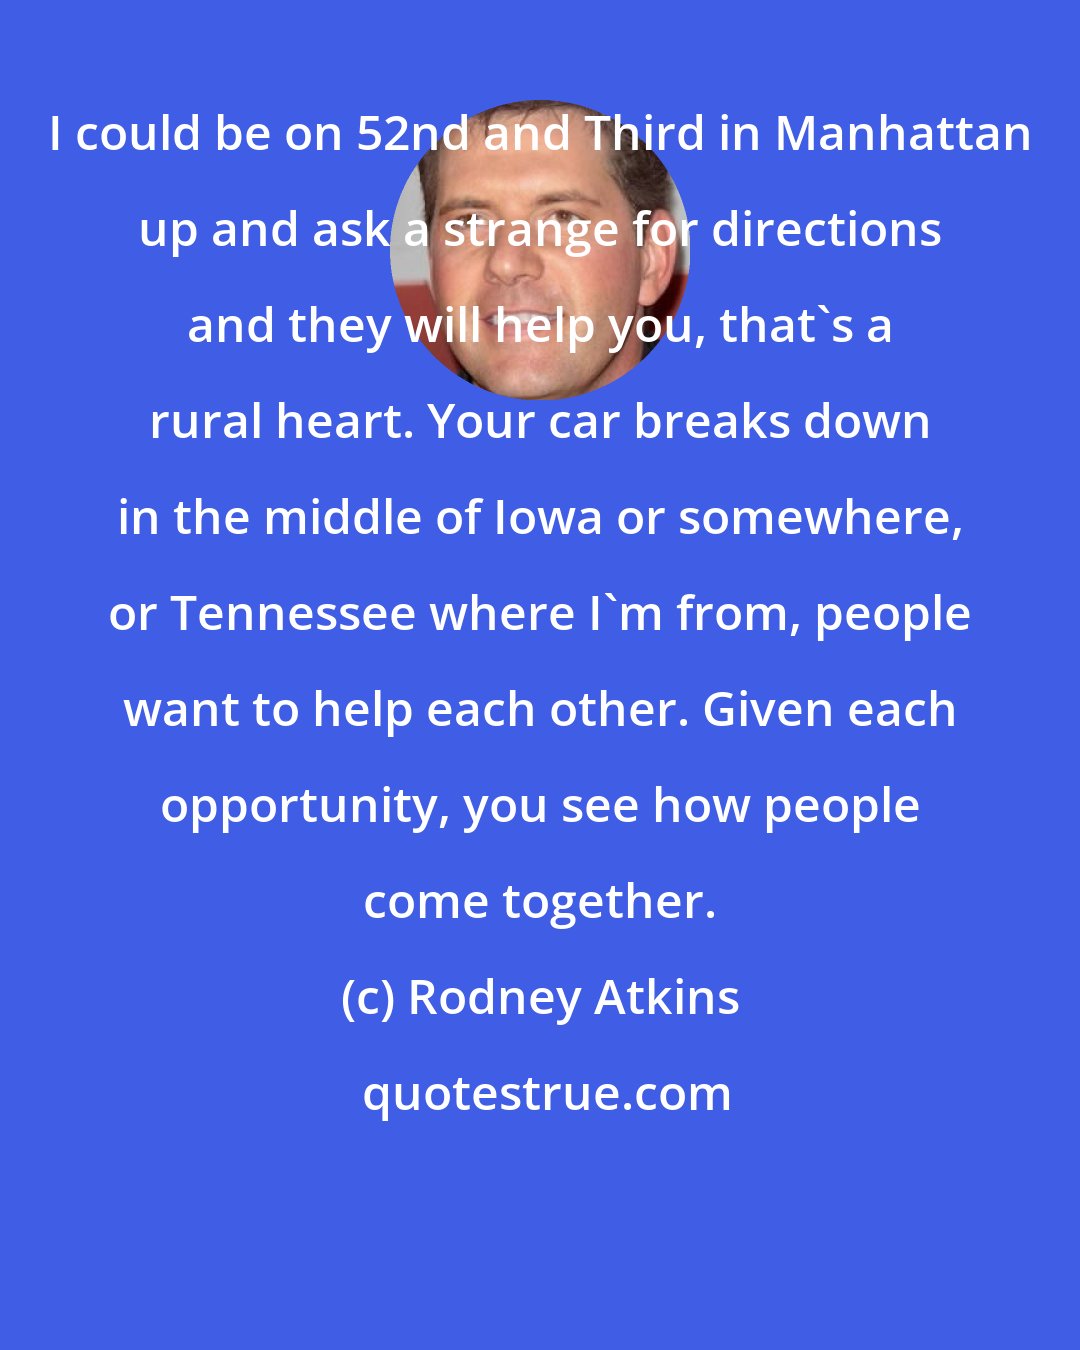 Rodney Atkins: I could be on 52nd and Third in Manhattan up and ask a strange for directions and they will help you, that's a rural heart. Your car breaks down in the middle of Iowa or somewhere, or Tennessee where I'm from, people want to help each other. Given each opportunity, you see how people come together.